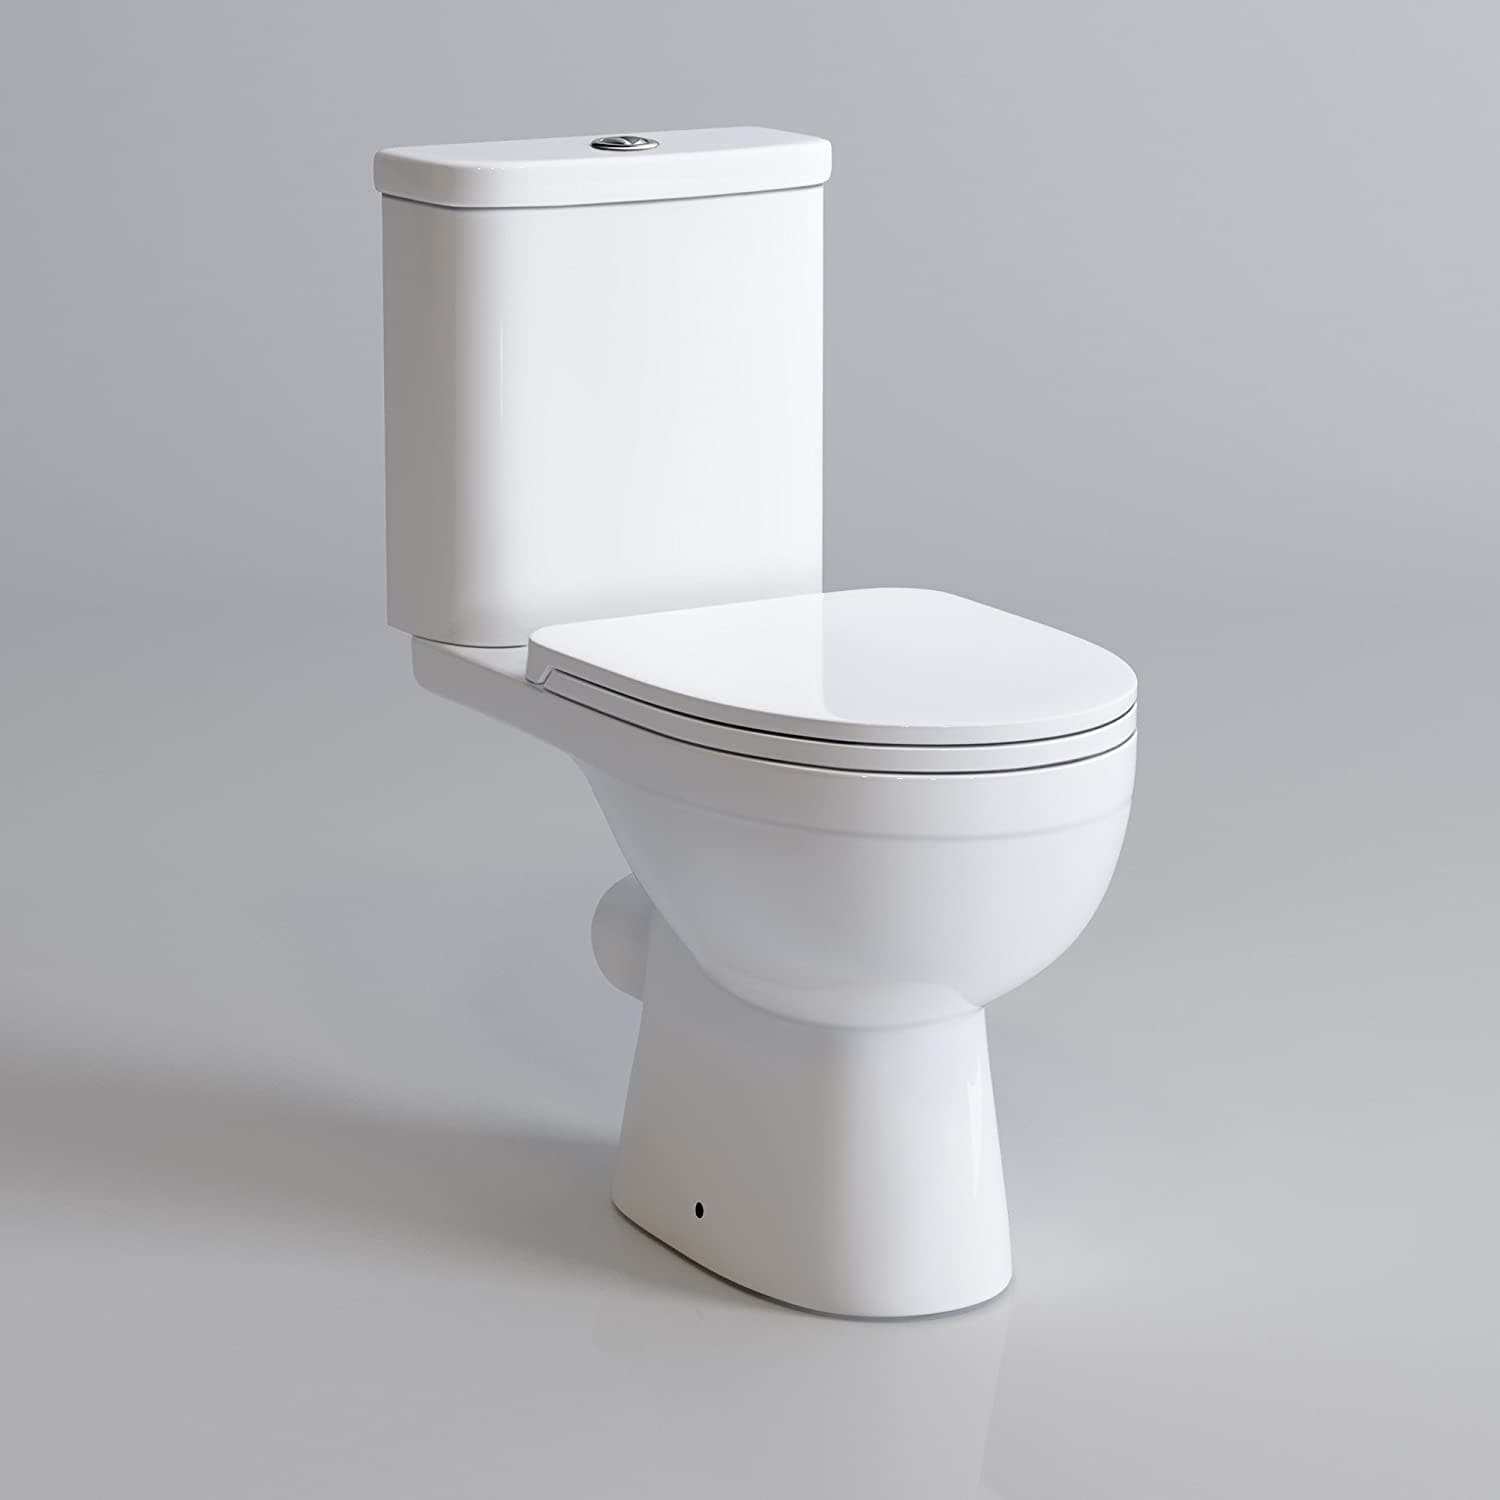 Modern Gloss White Bathroom Combination Unit: Toilet, Seat, Vanity Unit, and Basin. Ideal for UK homes, stylish and functional.